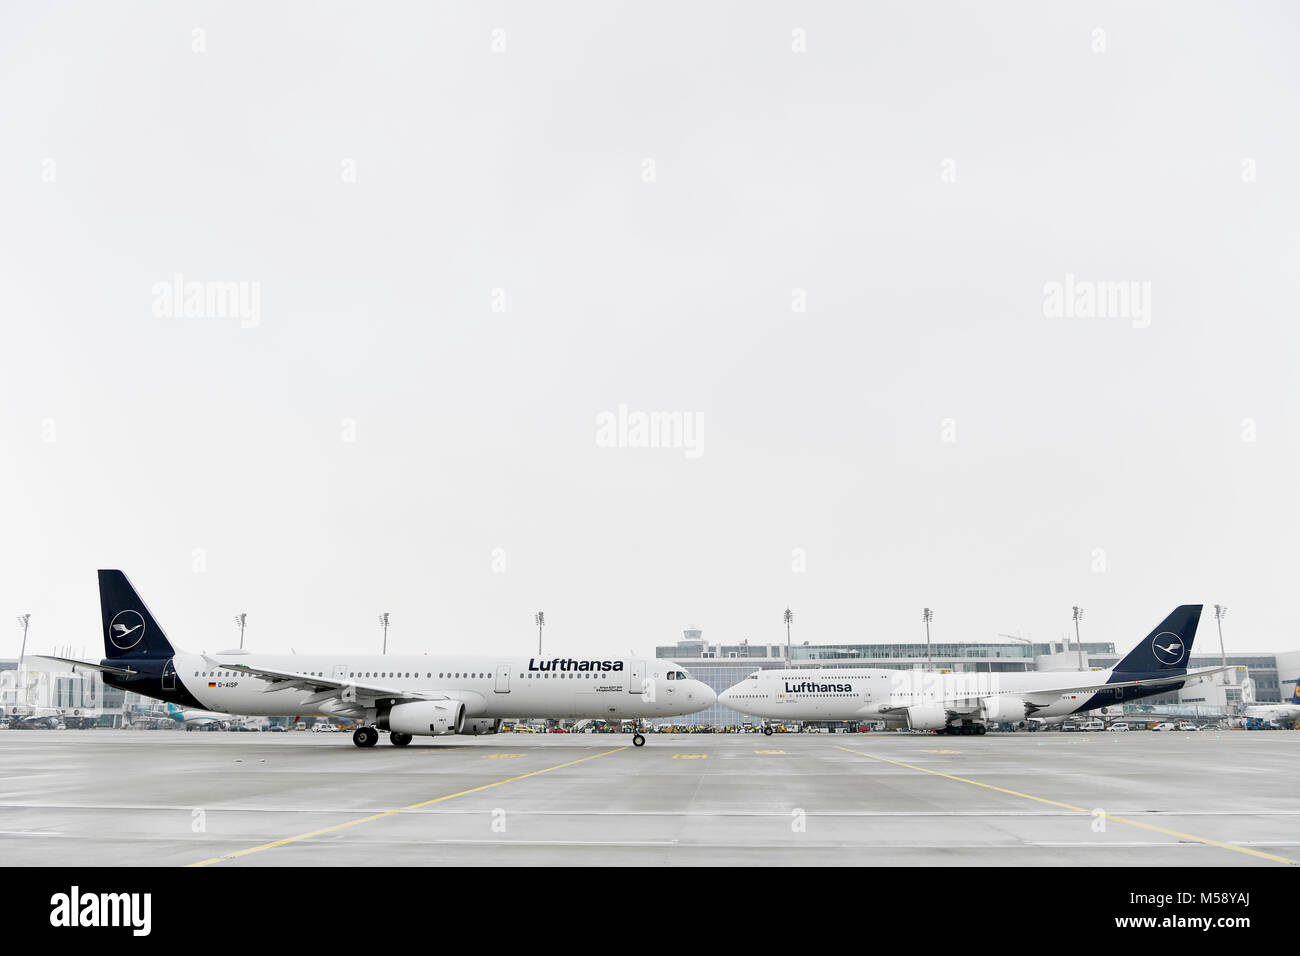 Lufthansa New Livery, New Branding, Boeing, B747-800, Airbus, A321,kiss, nose to nose, winter, snow, Terminal 1, Terminal 2, Tower, Munich Airport, Stock Photo